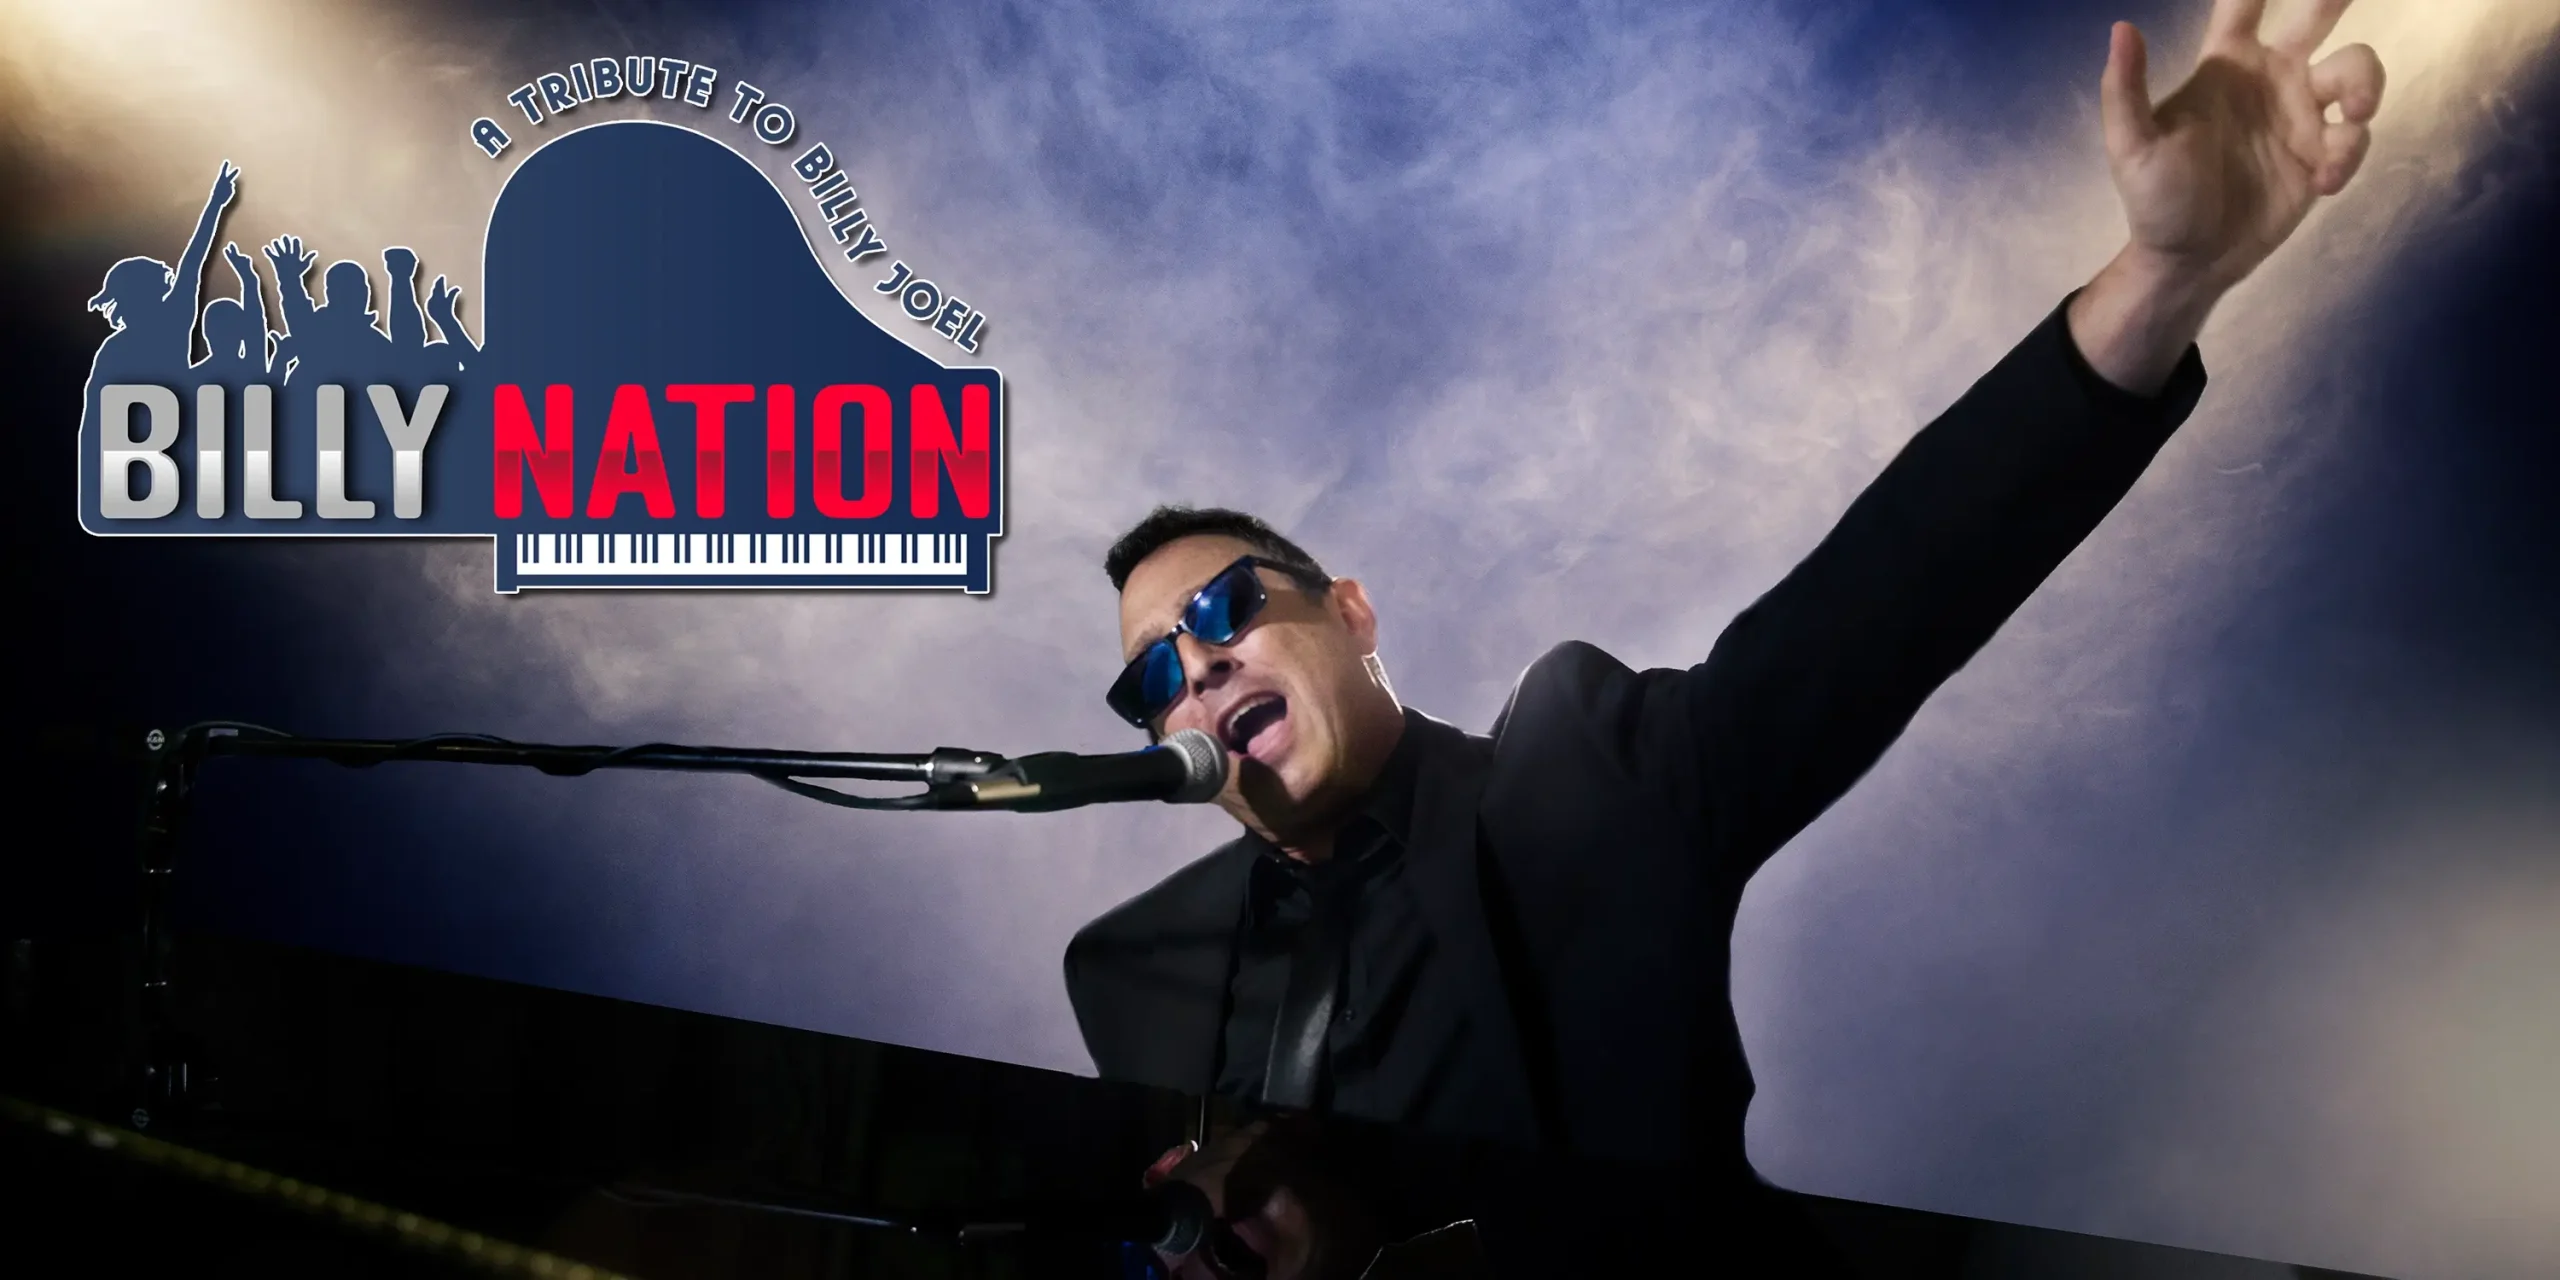 Fat Cat Booking presents: Billy Nation - a tribute to Billy Joel